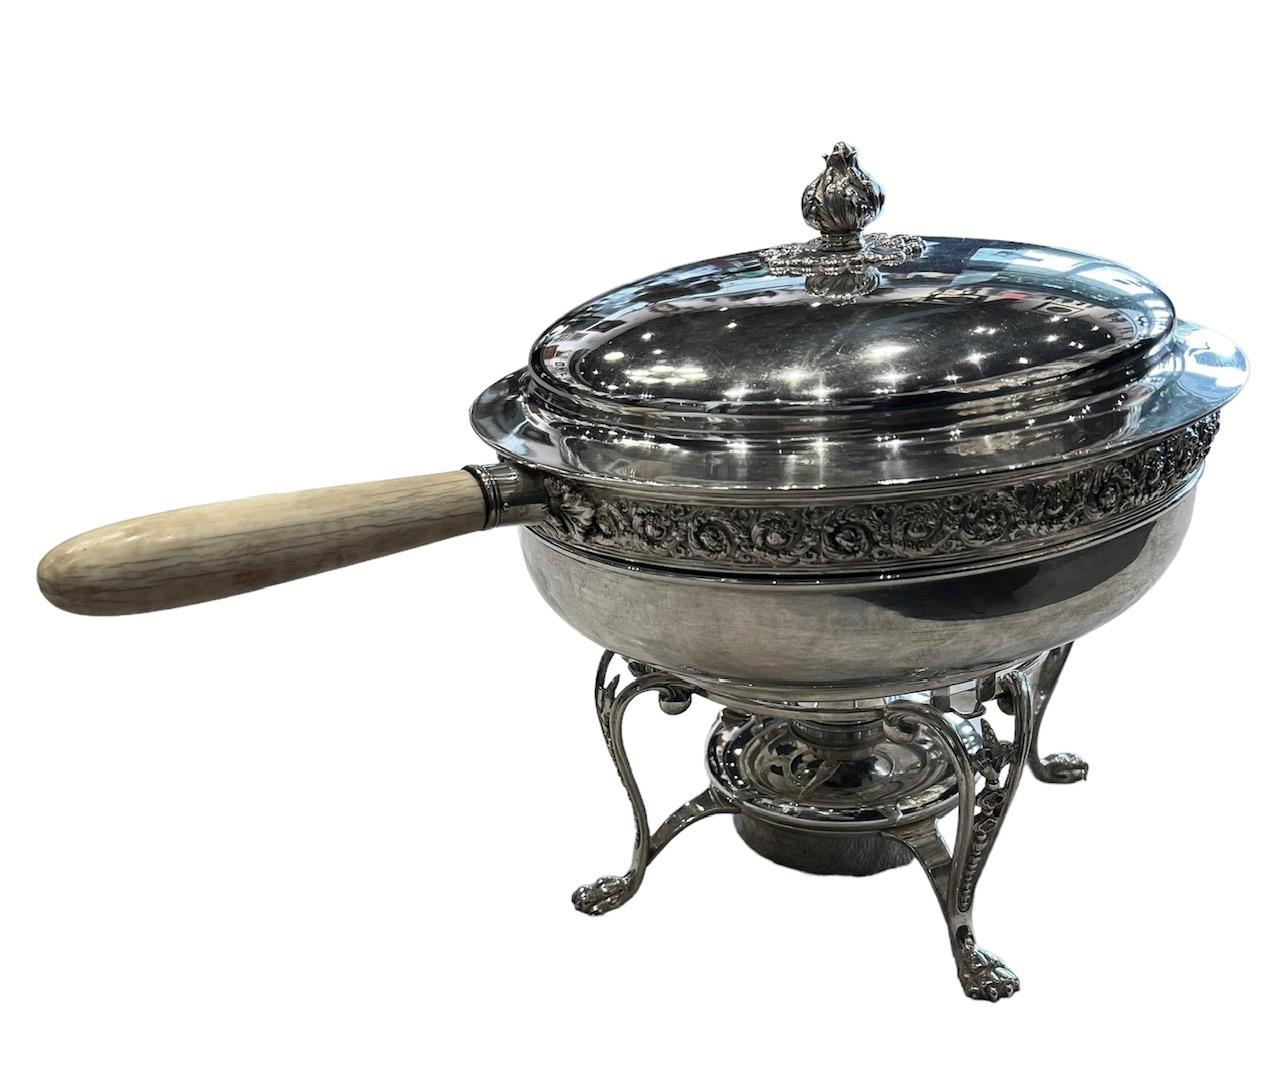 This exquisite Tiffany and Company sterling silver chafing dish, from New York, represents a timeless piece of culinary history. It showcases the renowned pattern 11079, a design that first graced dining tables in 1891, making it a treasured relic